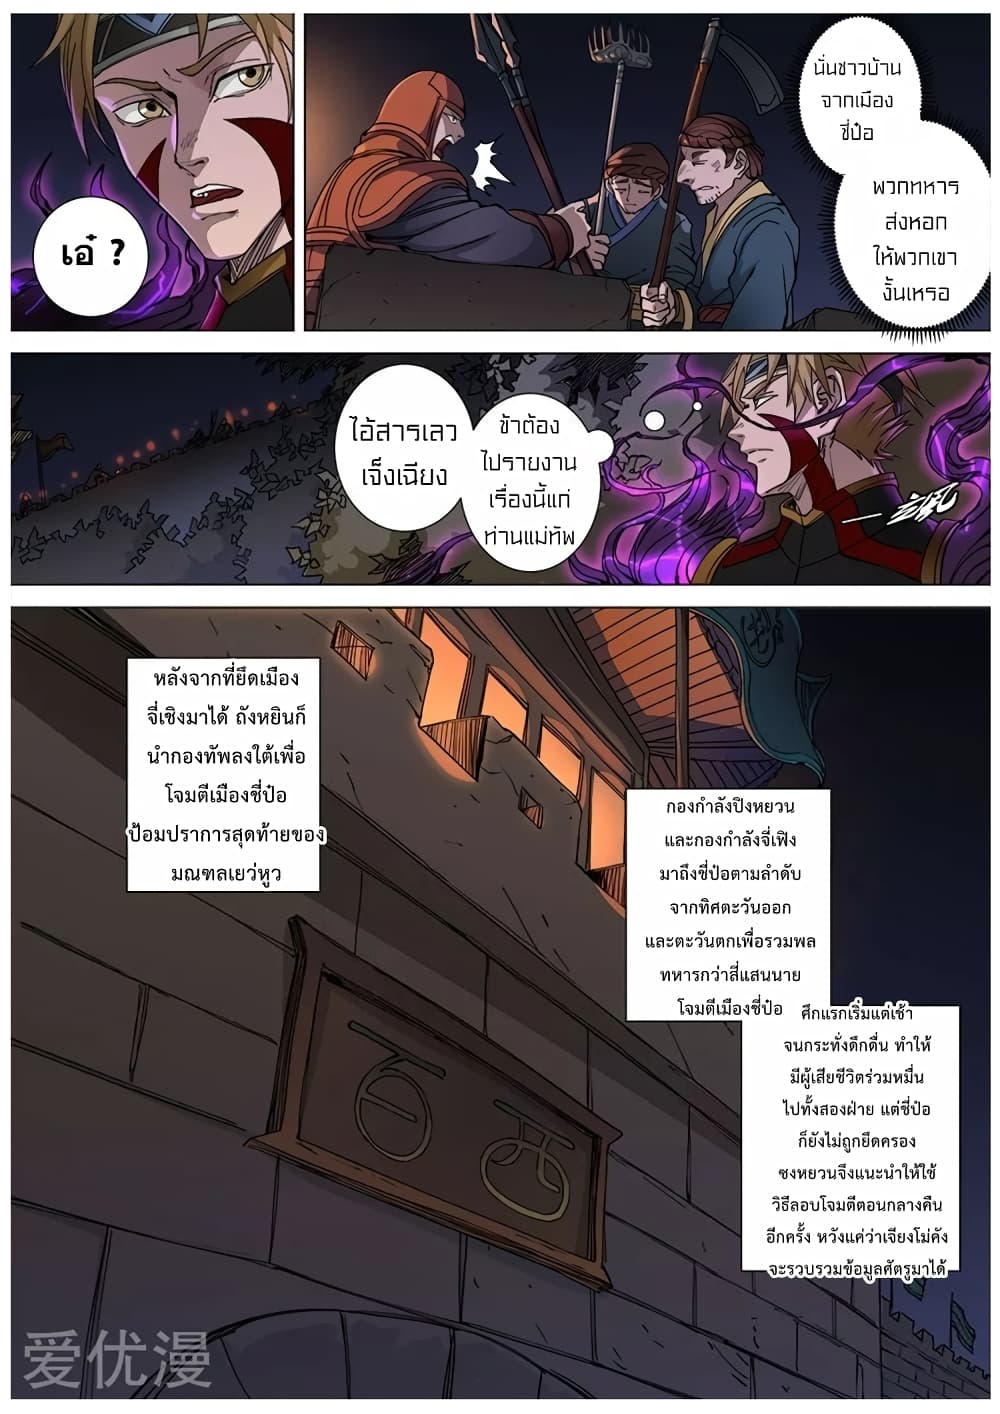 Tangyan in The Other World 107 (18)